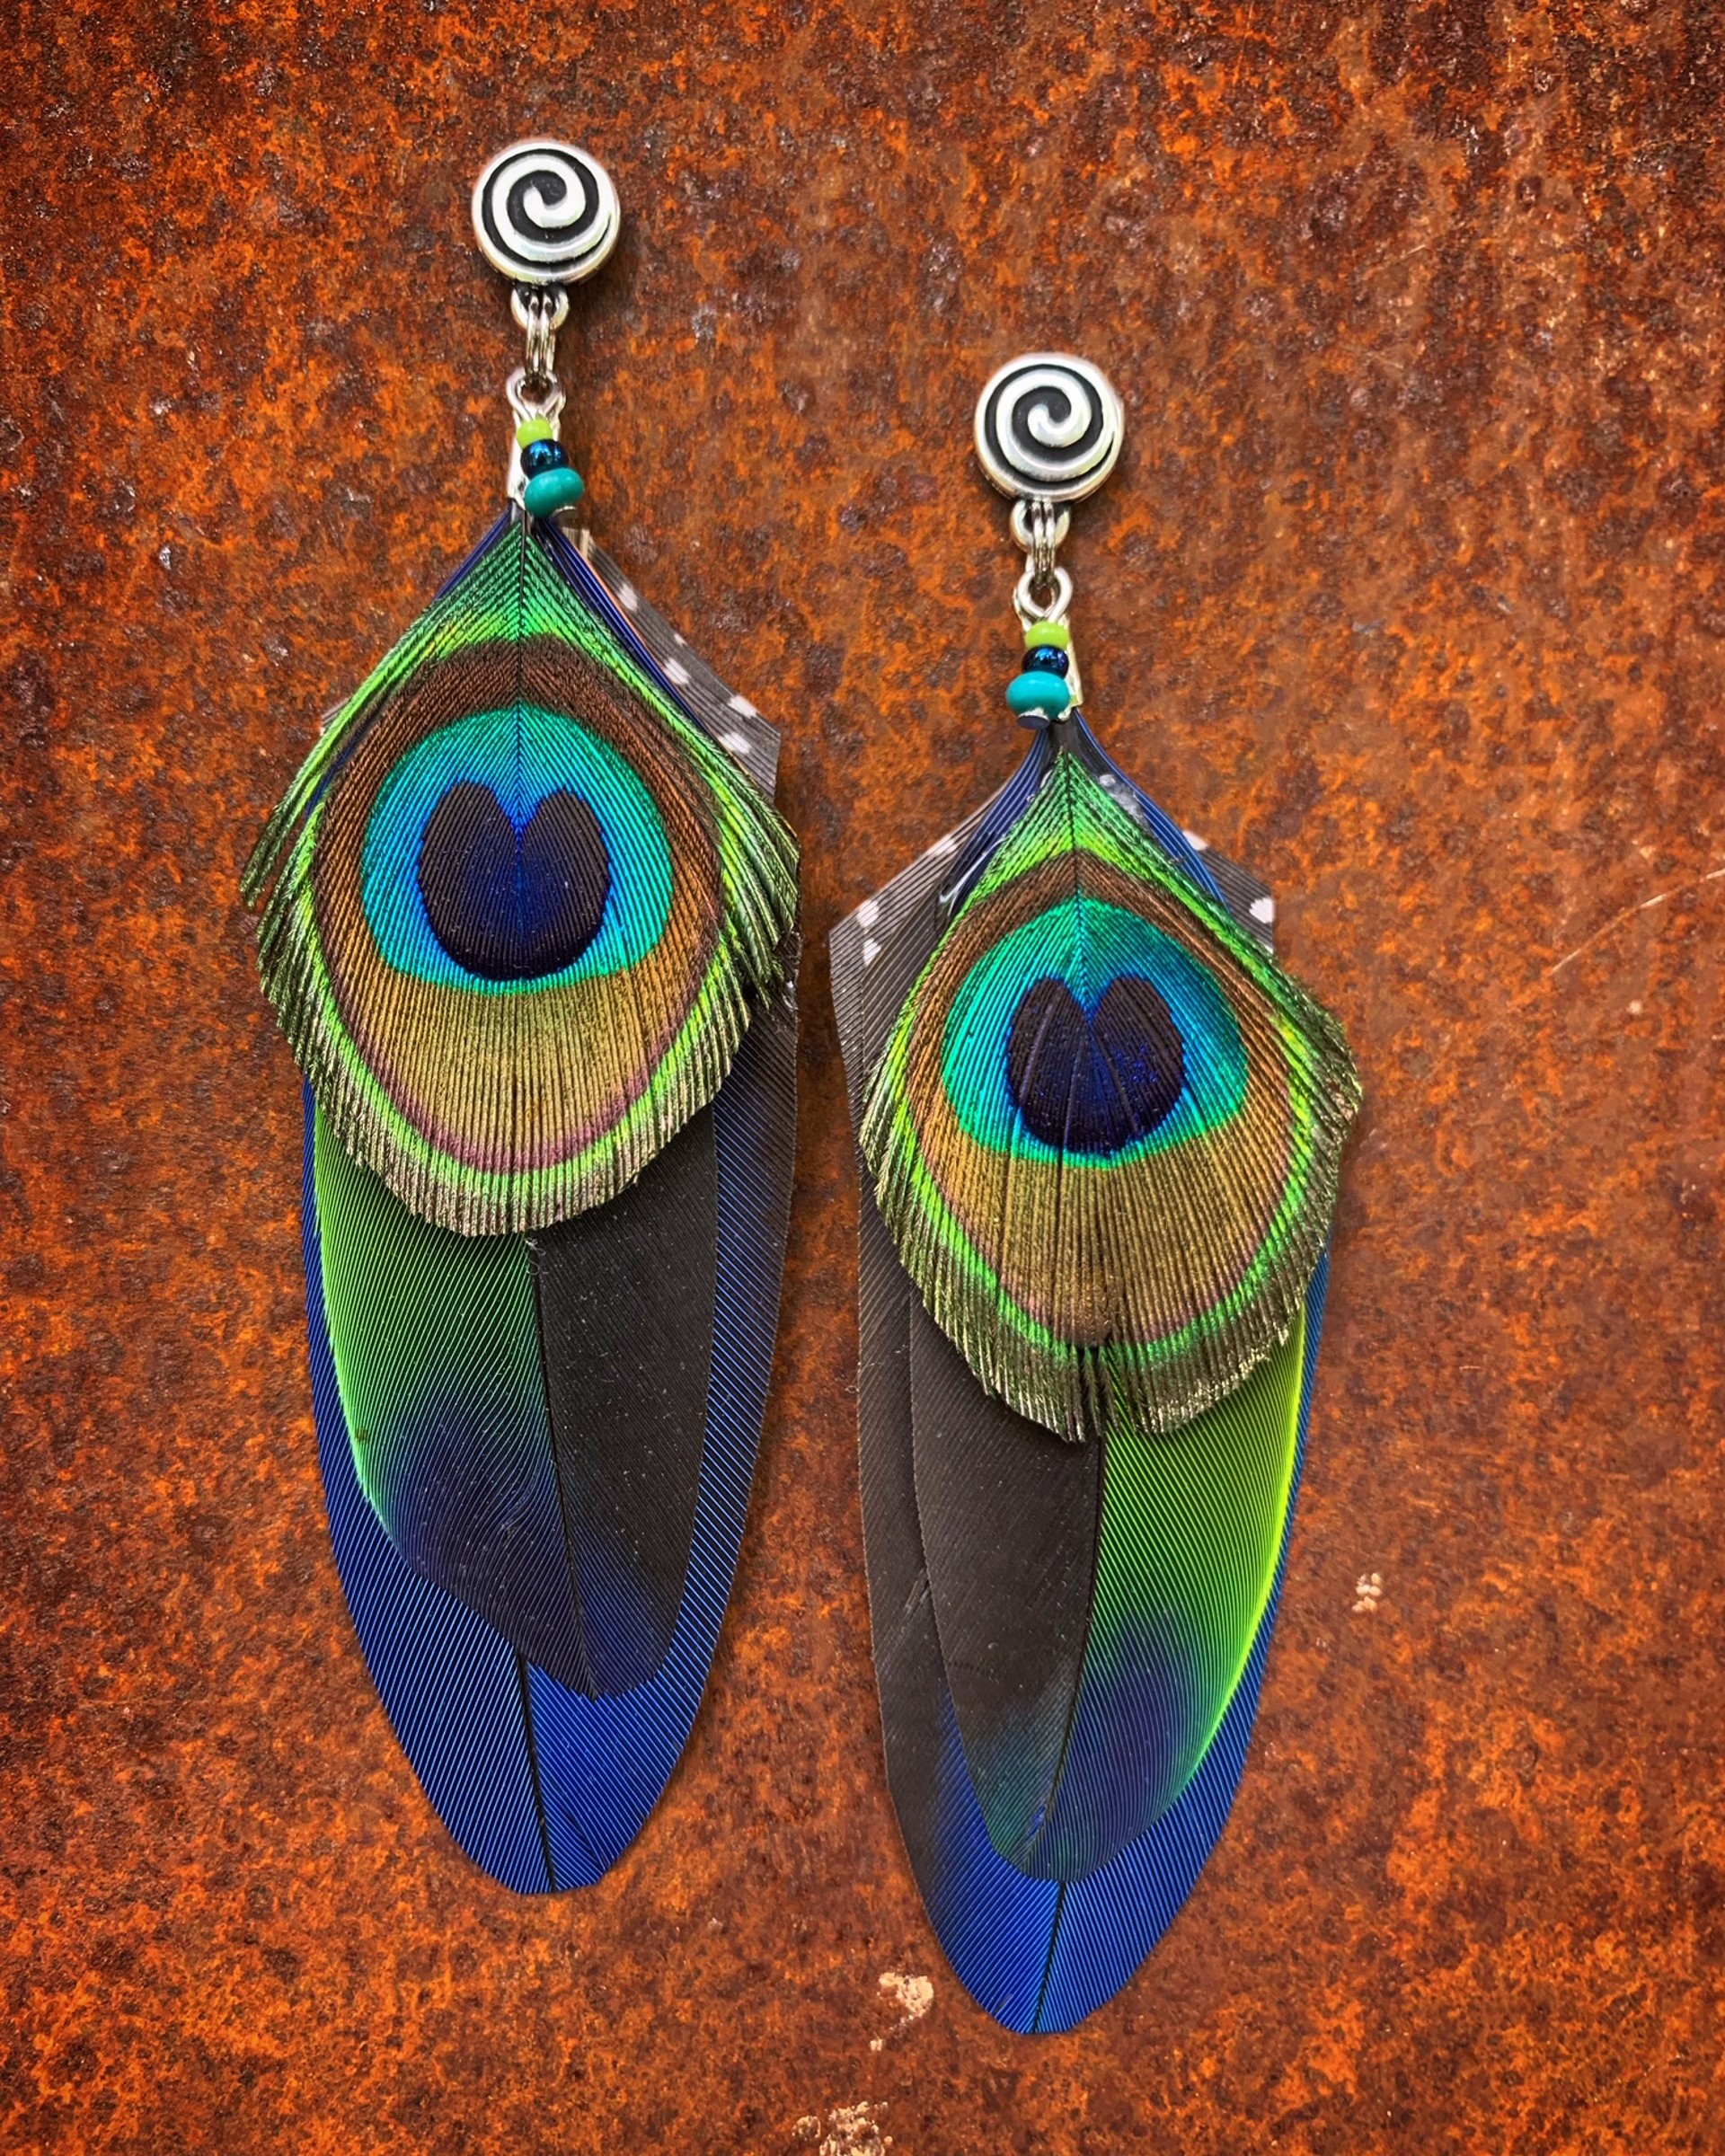 K834 Parrot and Peacock Earrings by Kelly Ormsby